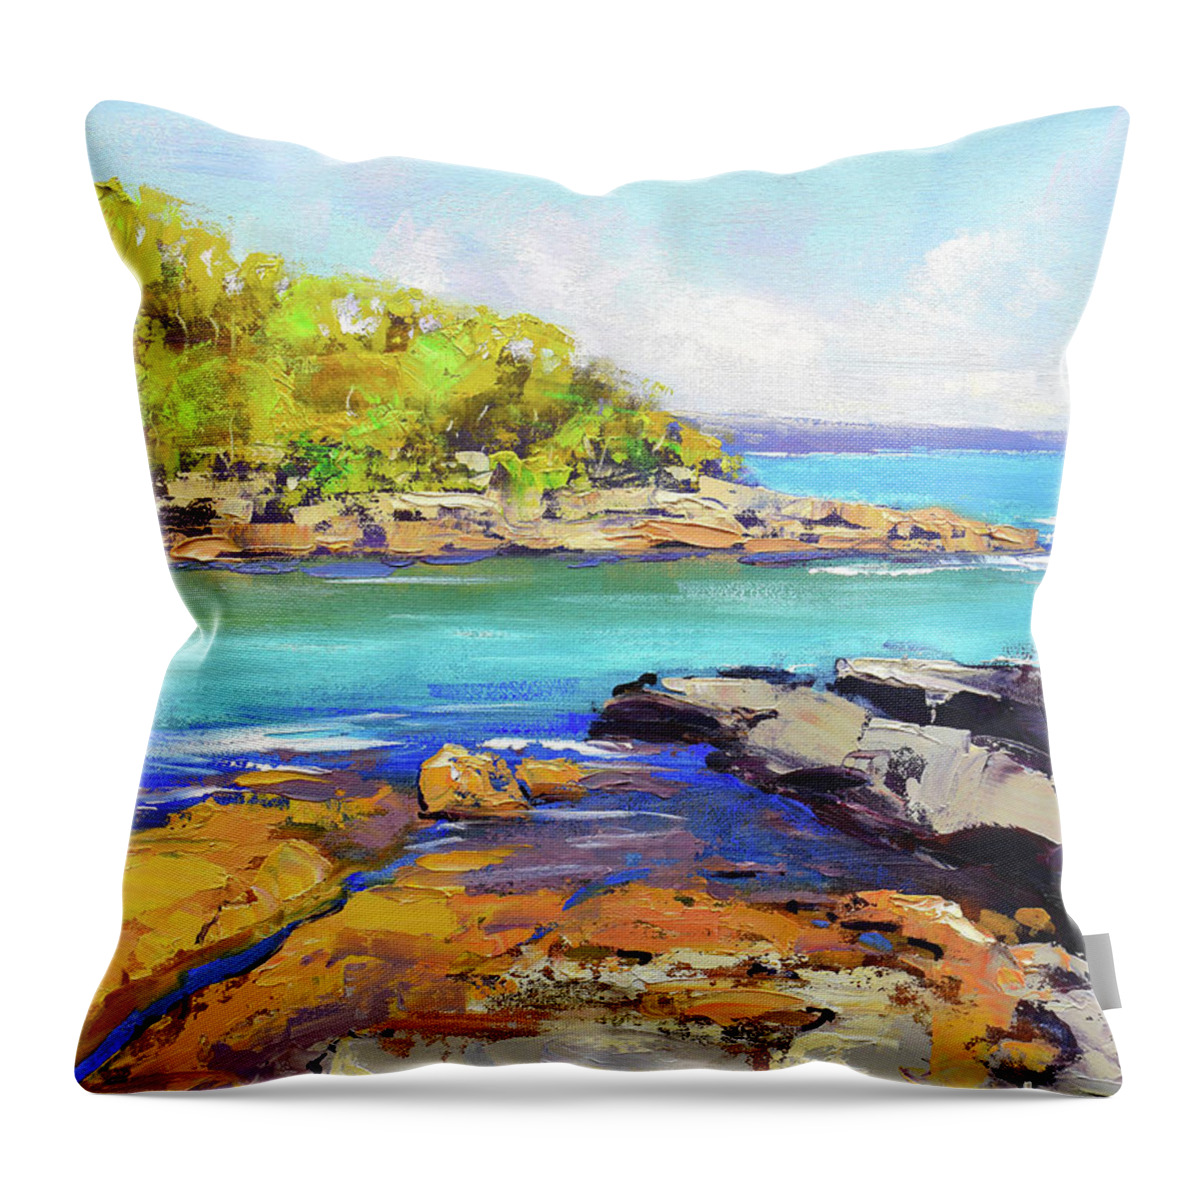 Beach Scenes Throw Pillow featuring the painting Honey Moon Bay nsw by Graham Gercken